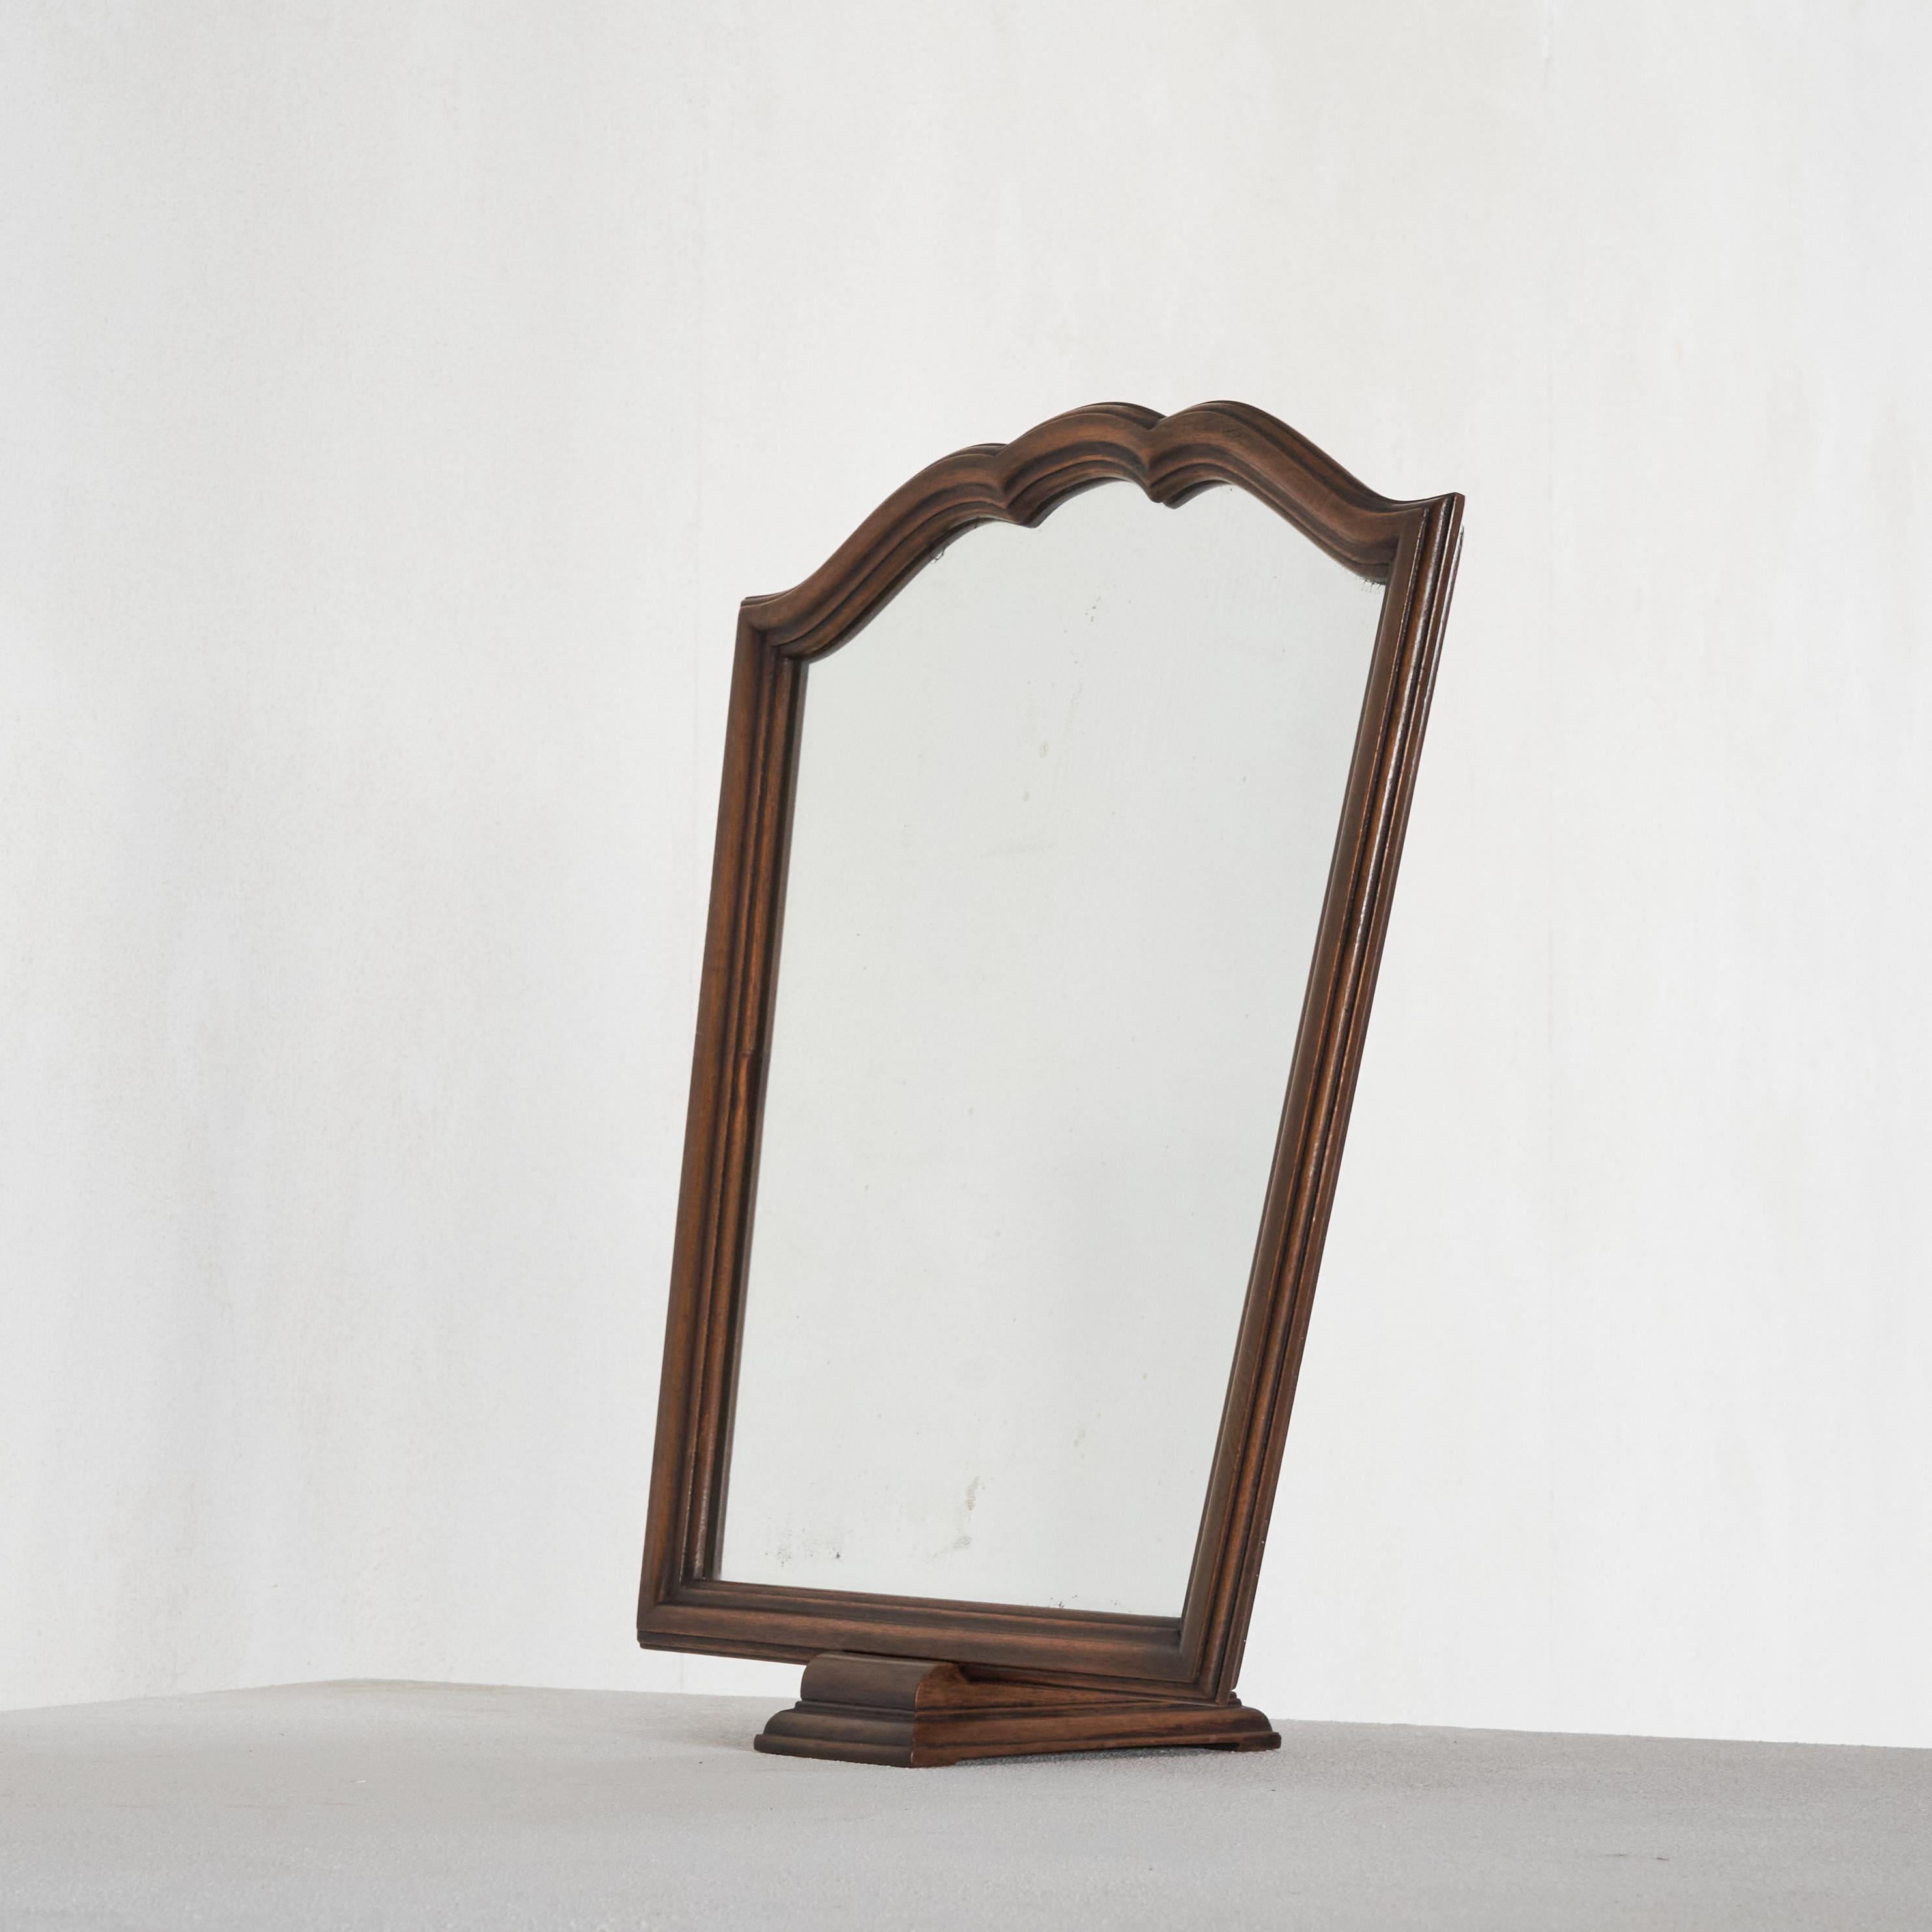 Elegant Antique Table Mirror in Wood, early 20th century.

This is a very elegant and delicate table mirror or vanity mirror in carved wood. Great size and shape, making it a wonderful addition to any vanity table, sideboard or desk. Great details